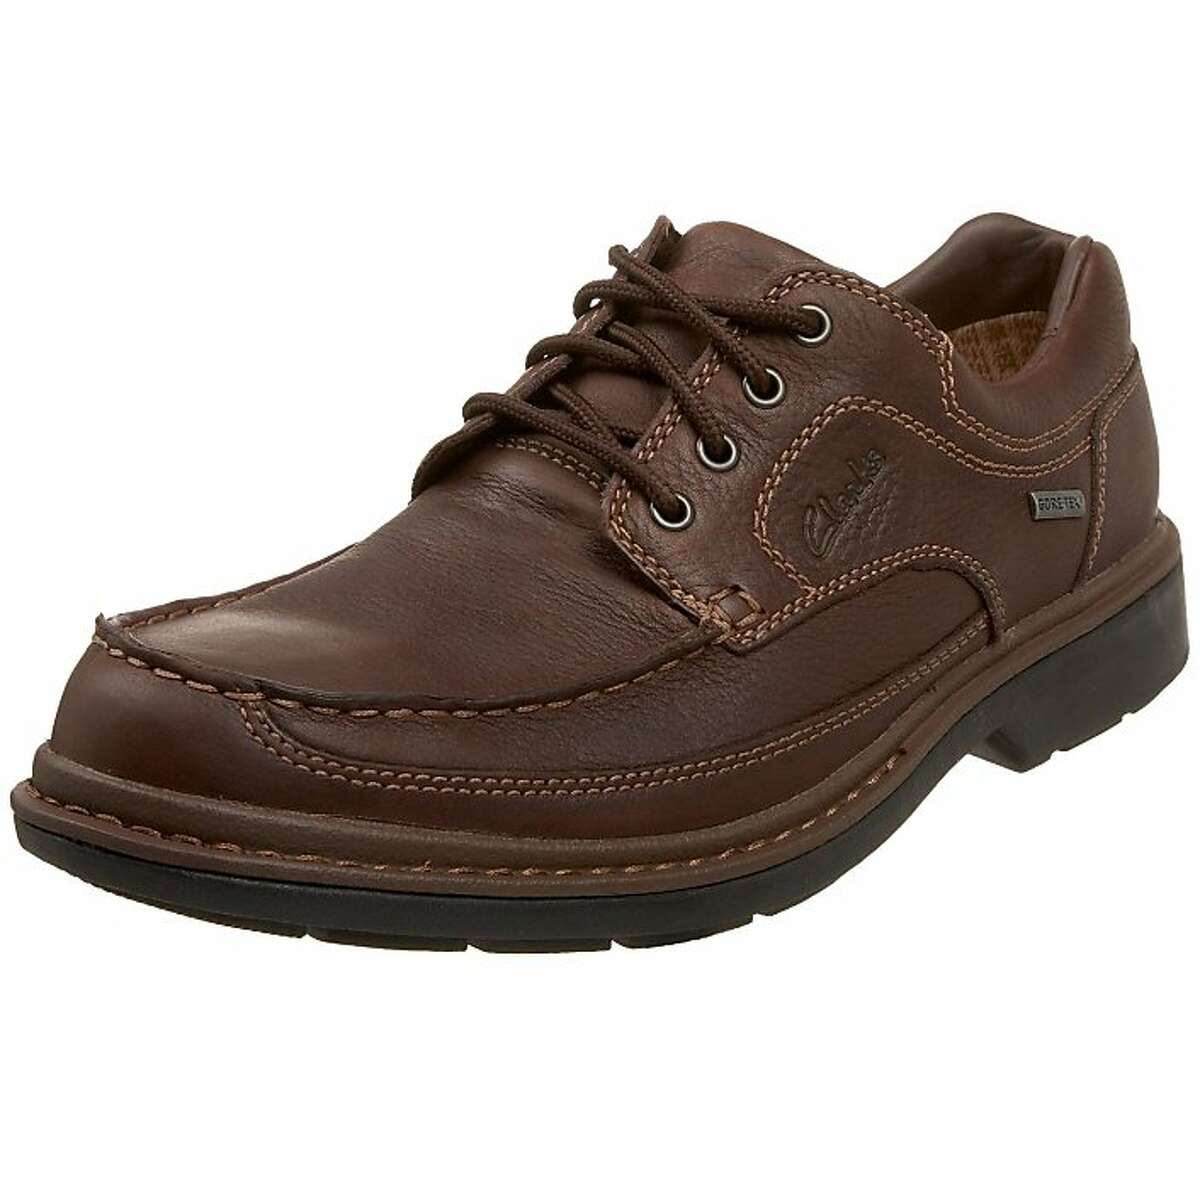 Clarks Street Lo shoes with Gore-Tex